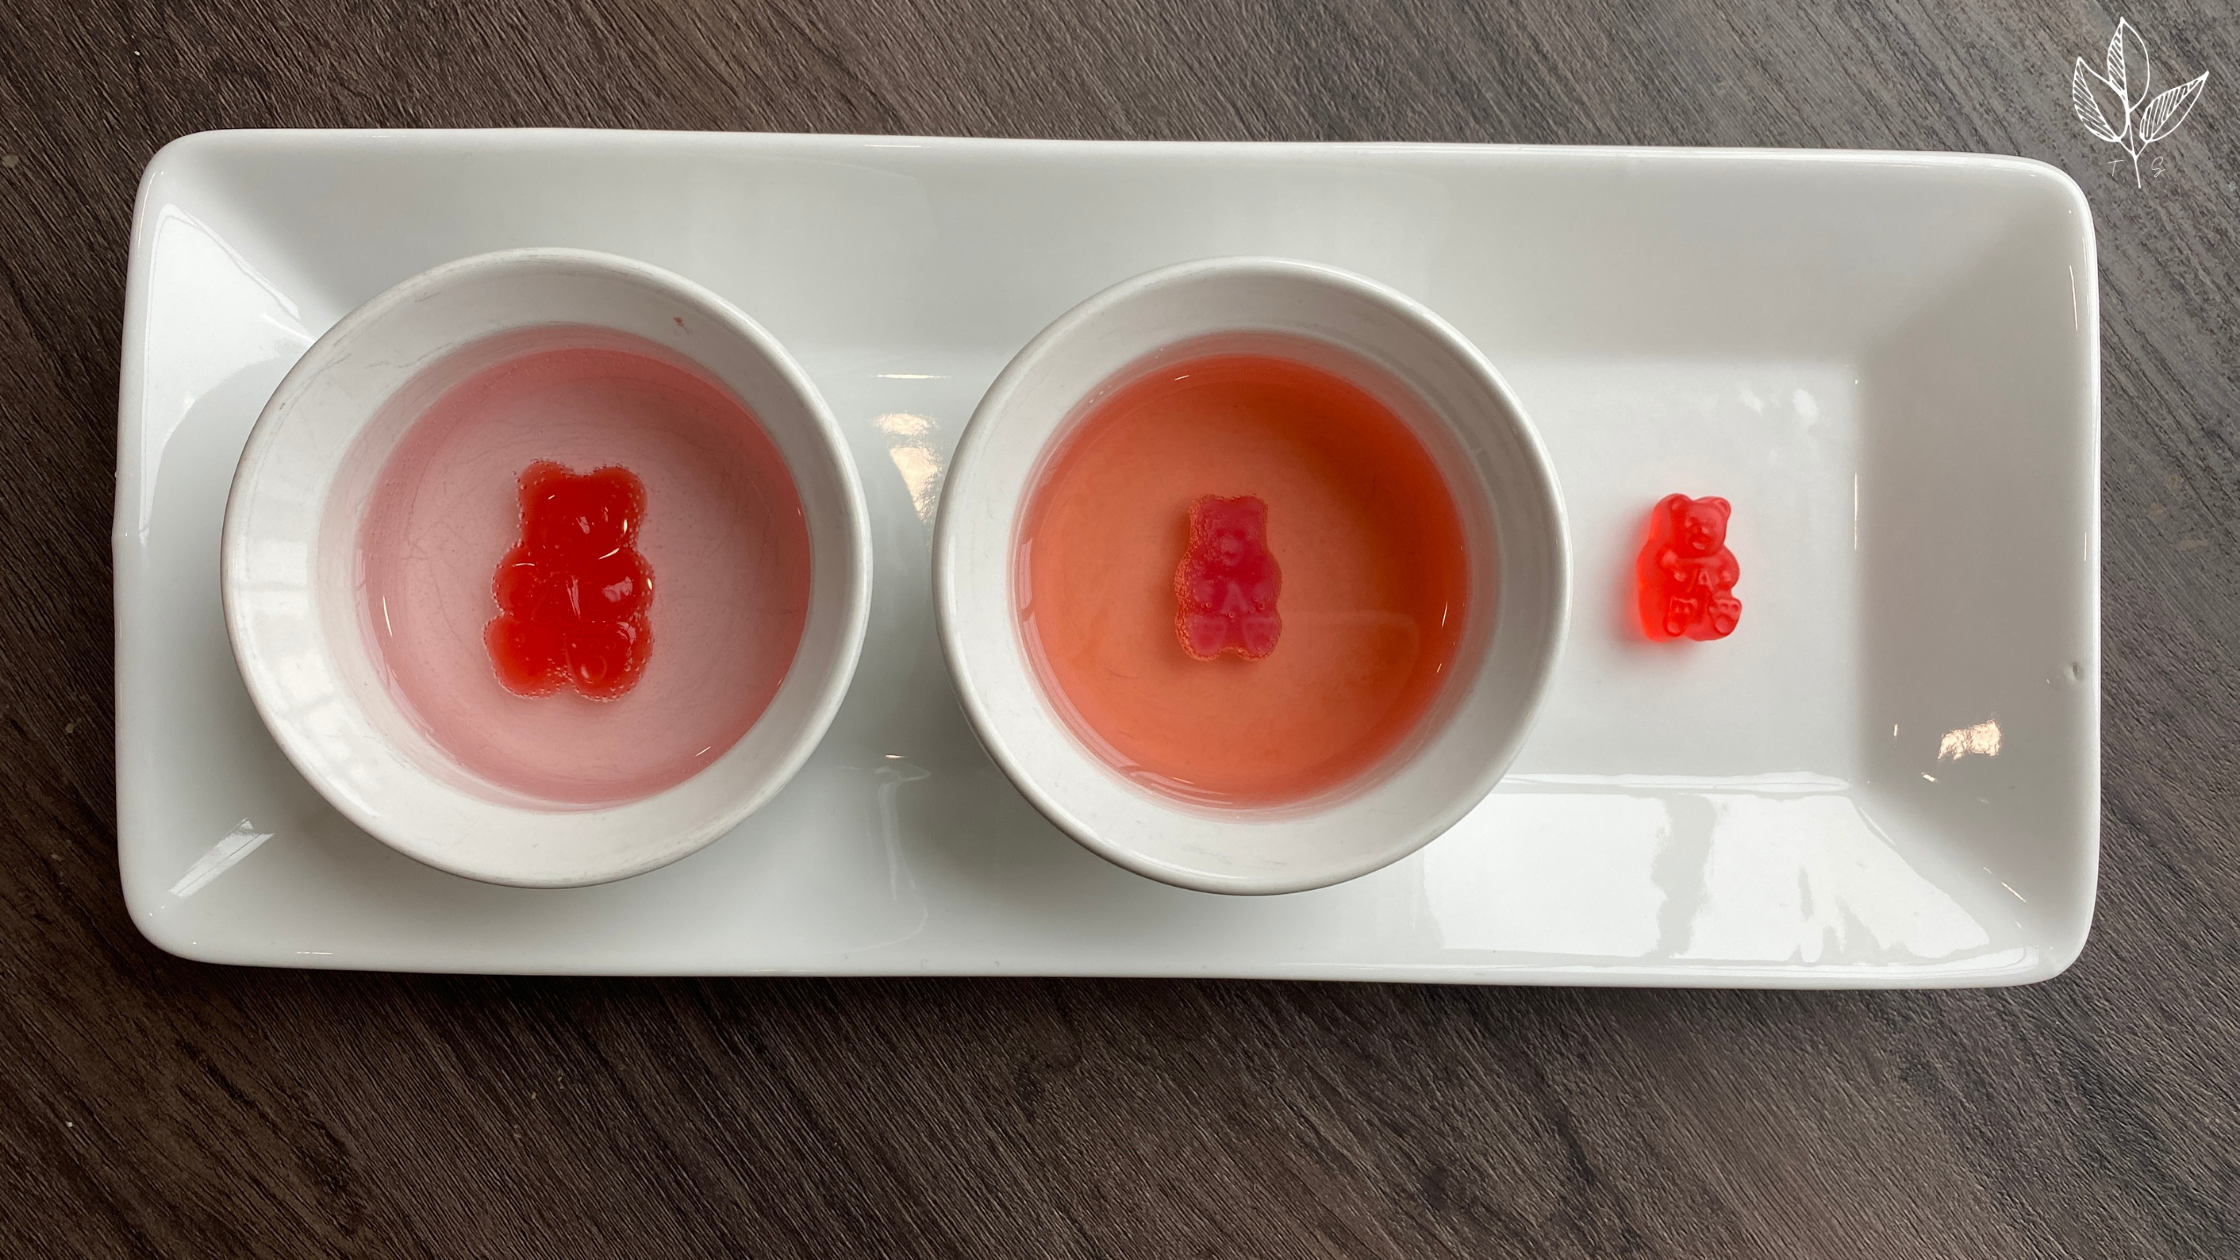 Gummy Bear Experiment Results